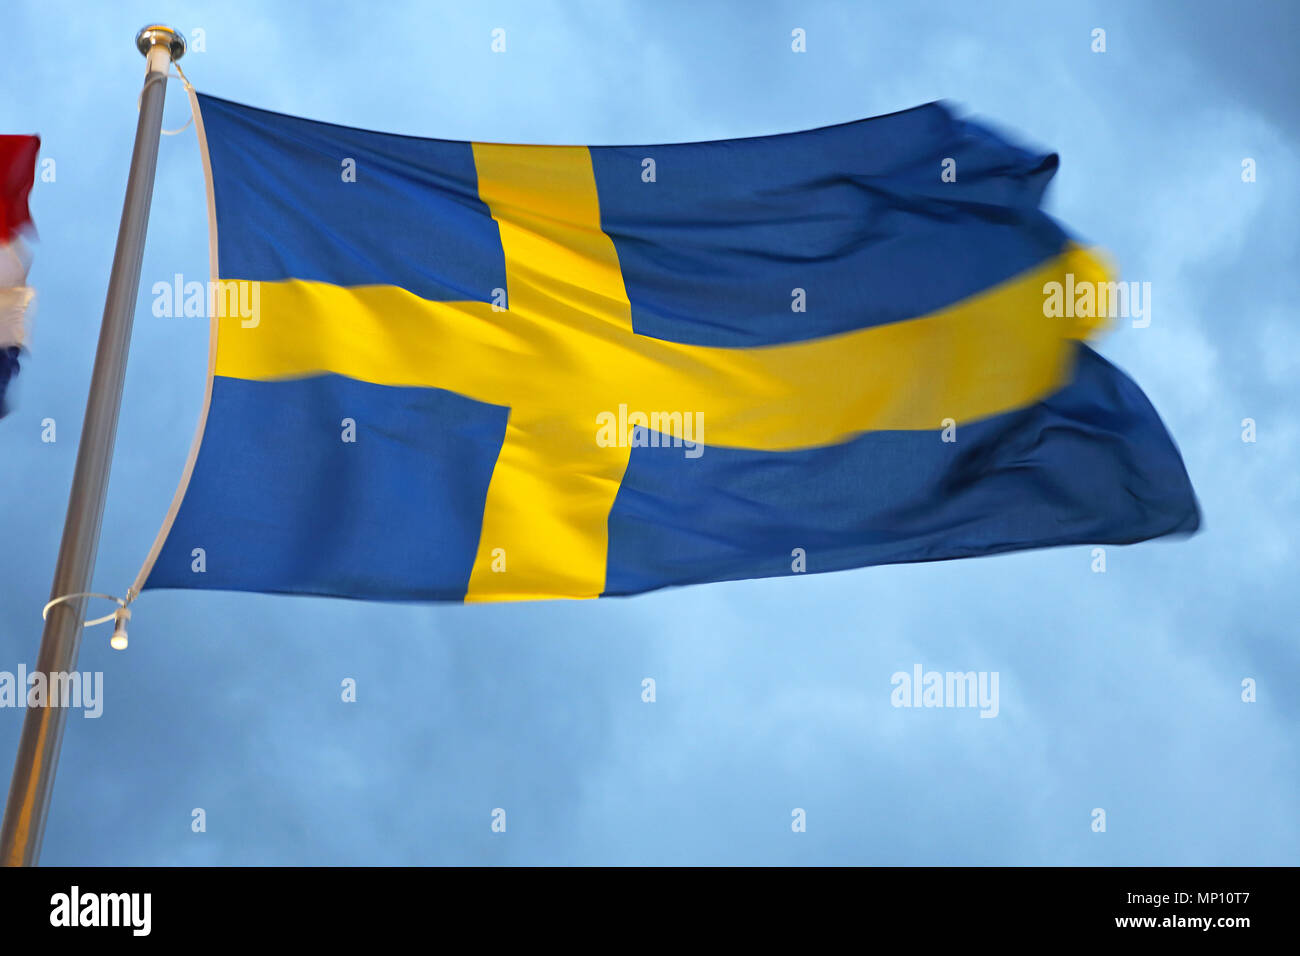 Sweden Blue Flag With Scandinavian Yellow Cross at Windy Night Stock Photo